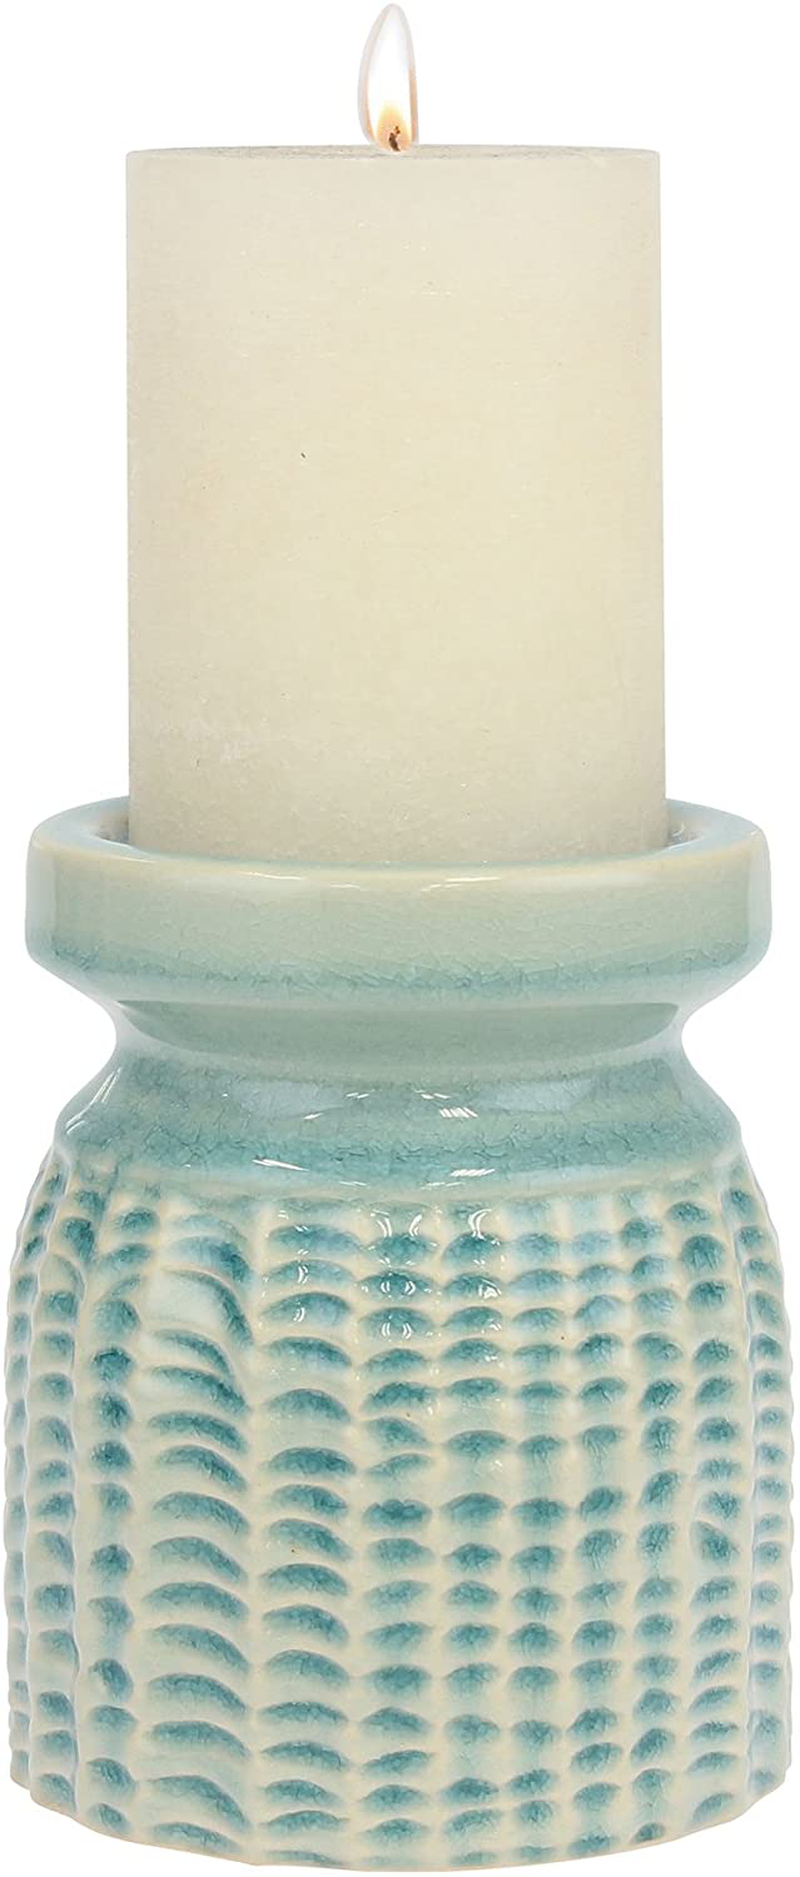 Stonebriar Decorative Textured Pale Ocean Ceramic Pillar Candle Holder, Coastal Home Decor Accents, Beach Inspired Design for the Living Room, Bathroom, or Bedroom of your Seaside Cottage Decor Home & Garden > Decor > Home Fragrance Accessories > Candle Holders Stonebriar Default Title  